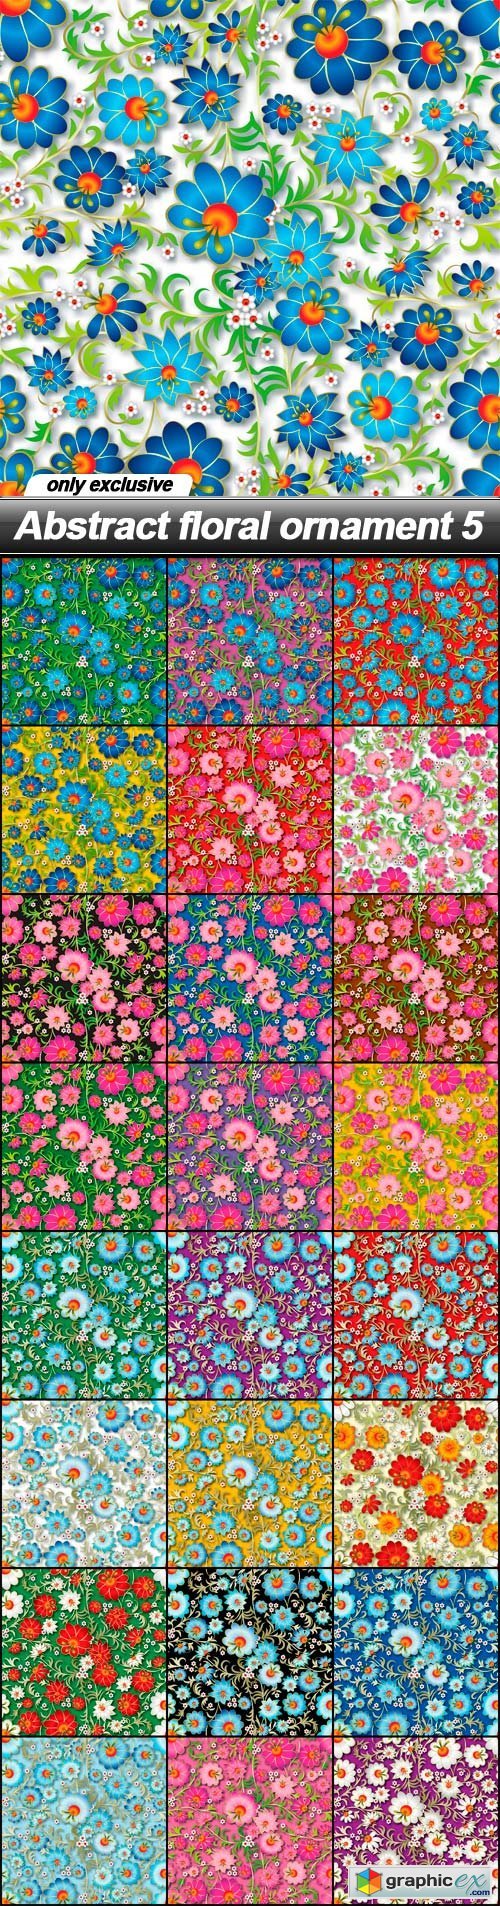 Abstract floral ornament 5 - 25 EPS